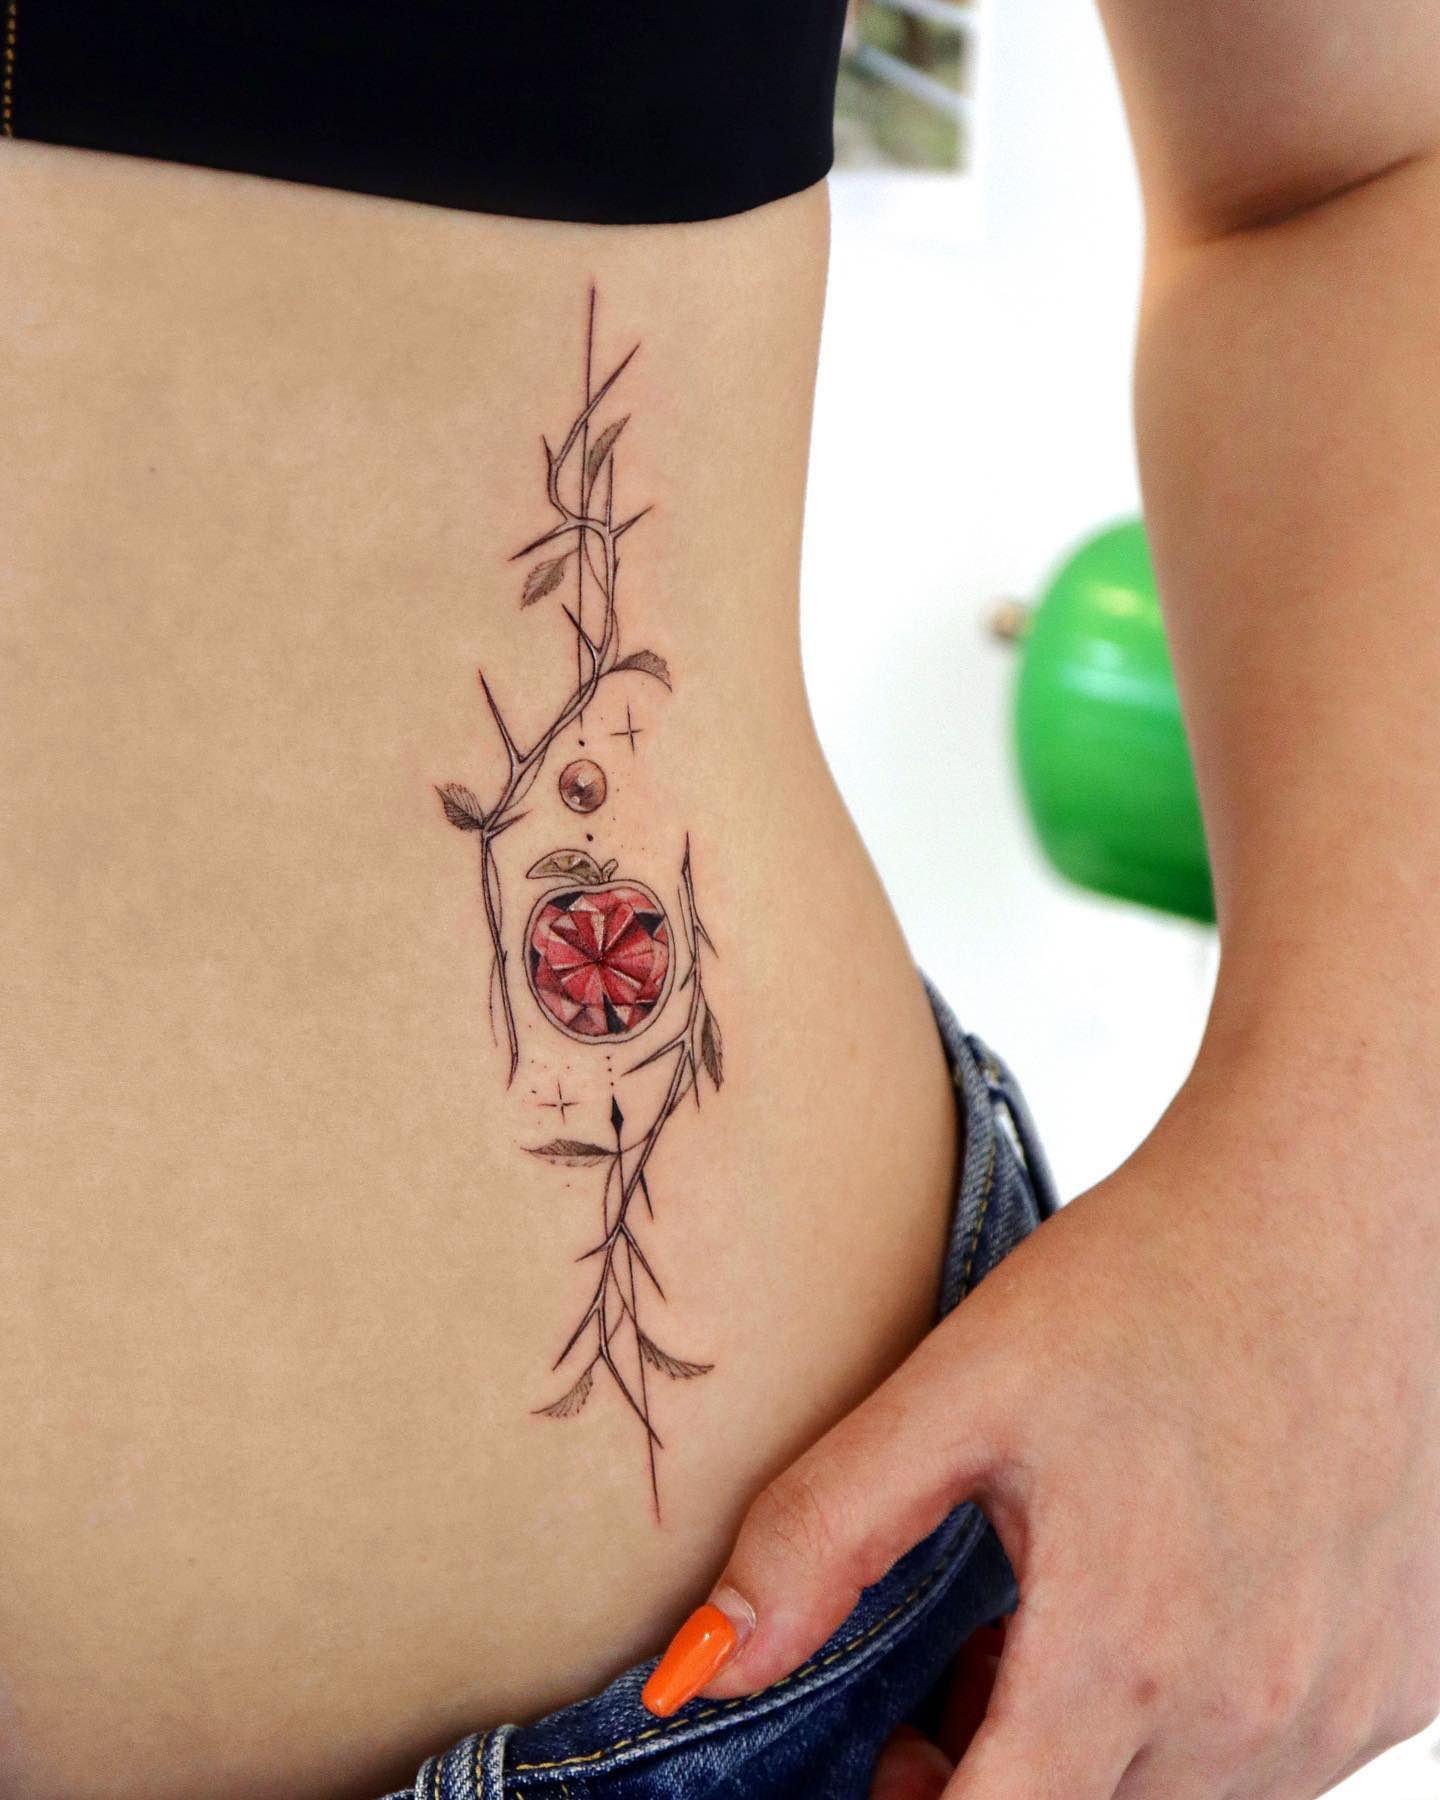 Tattoo tagged with: flower, side boob, small, single needle, languages,  tiny, rose, ifttt, little, nature, english, brave, english word, word,  ghinko | inked-app.com